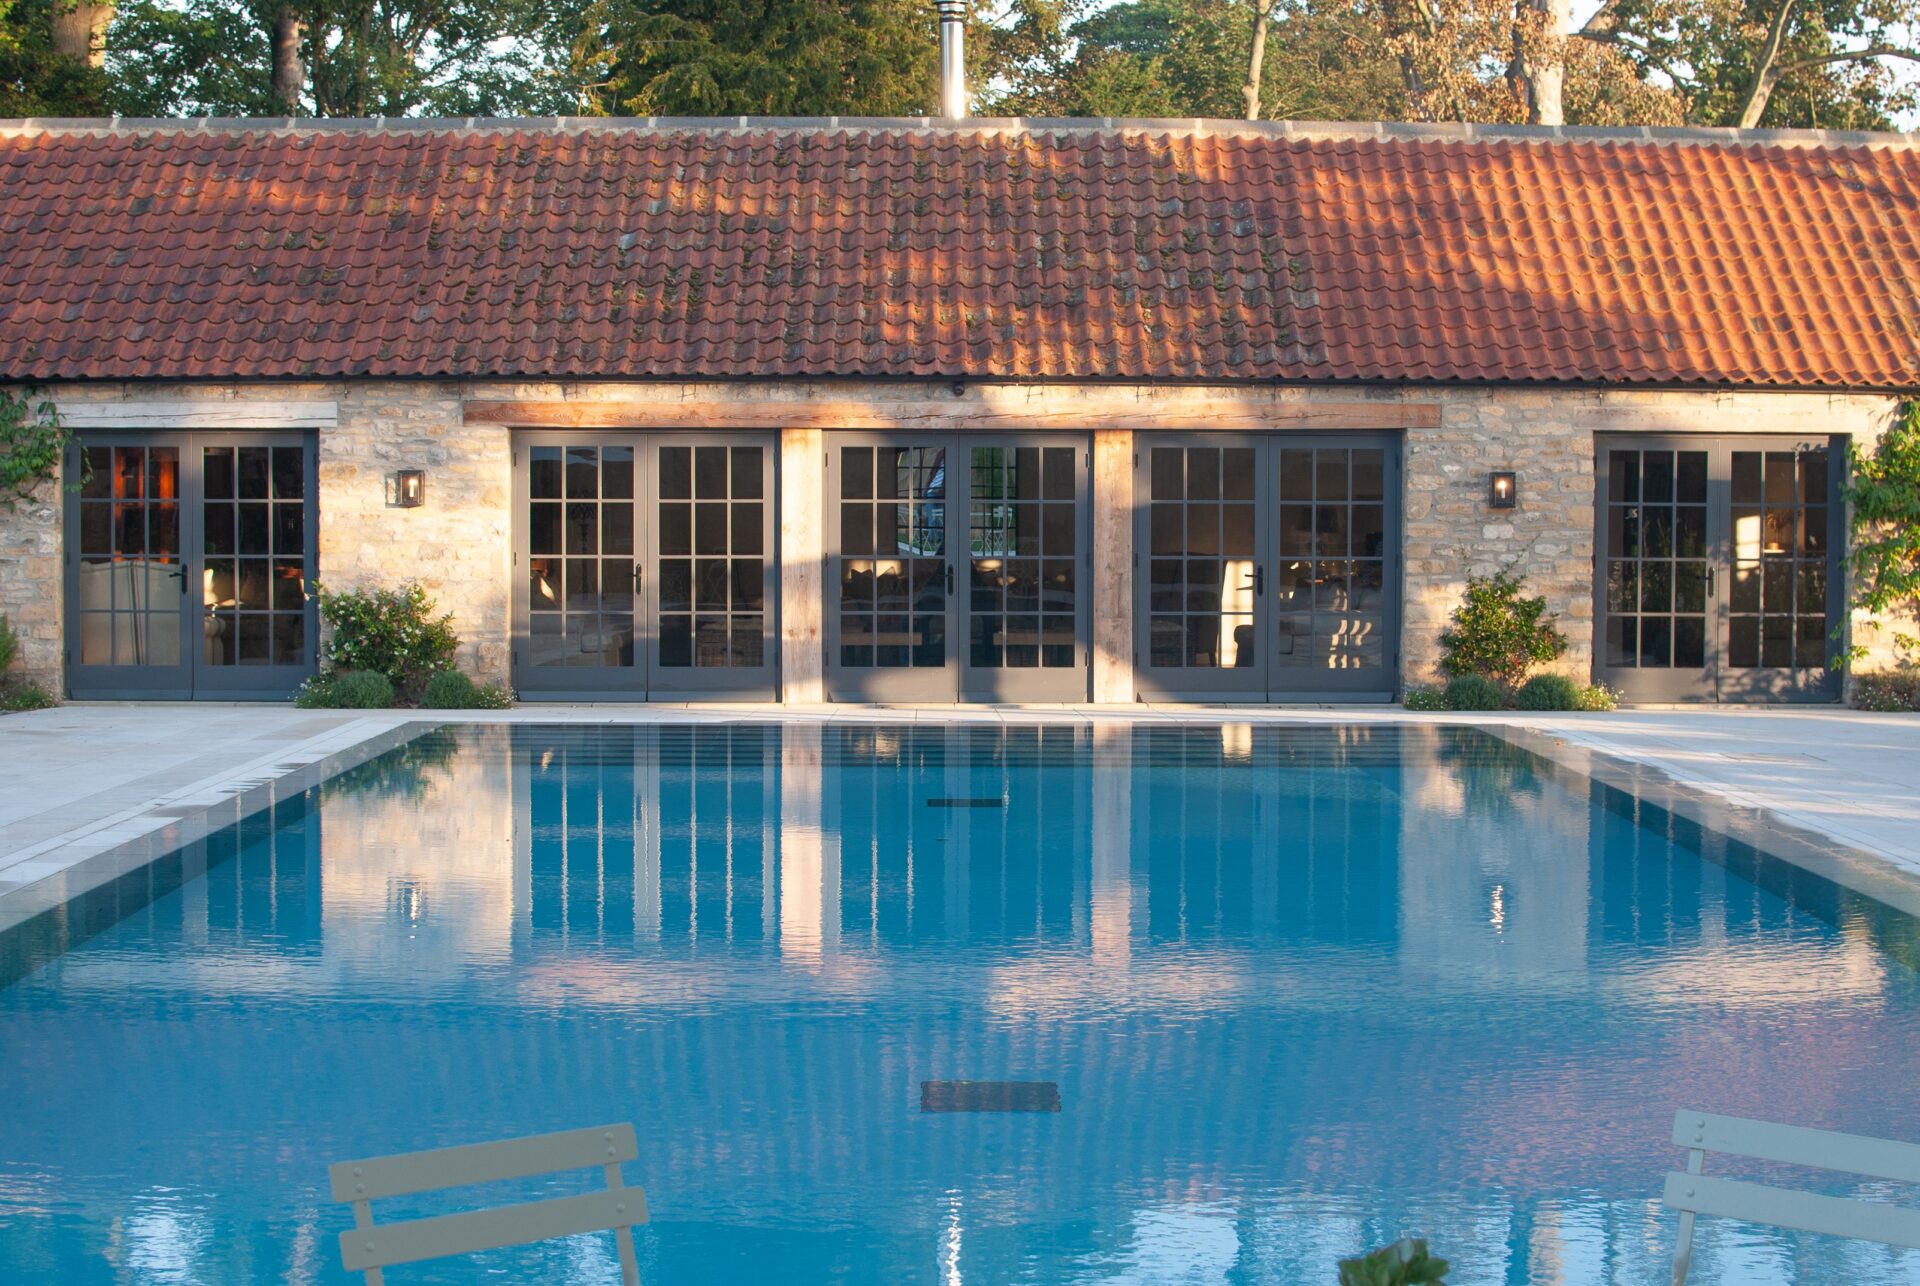 The pool at Forest Spa, Middleton Lodge Estate, Rebecca Tappin